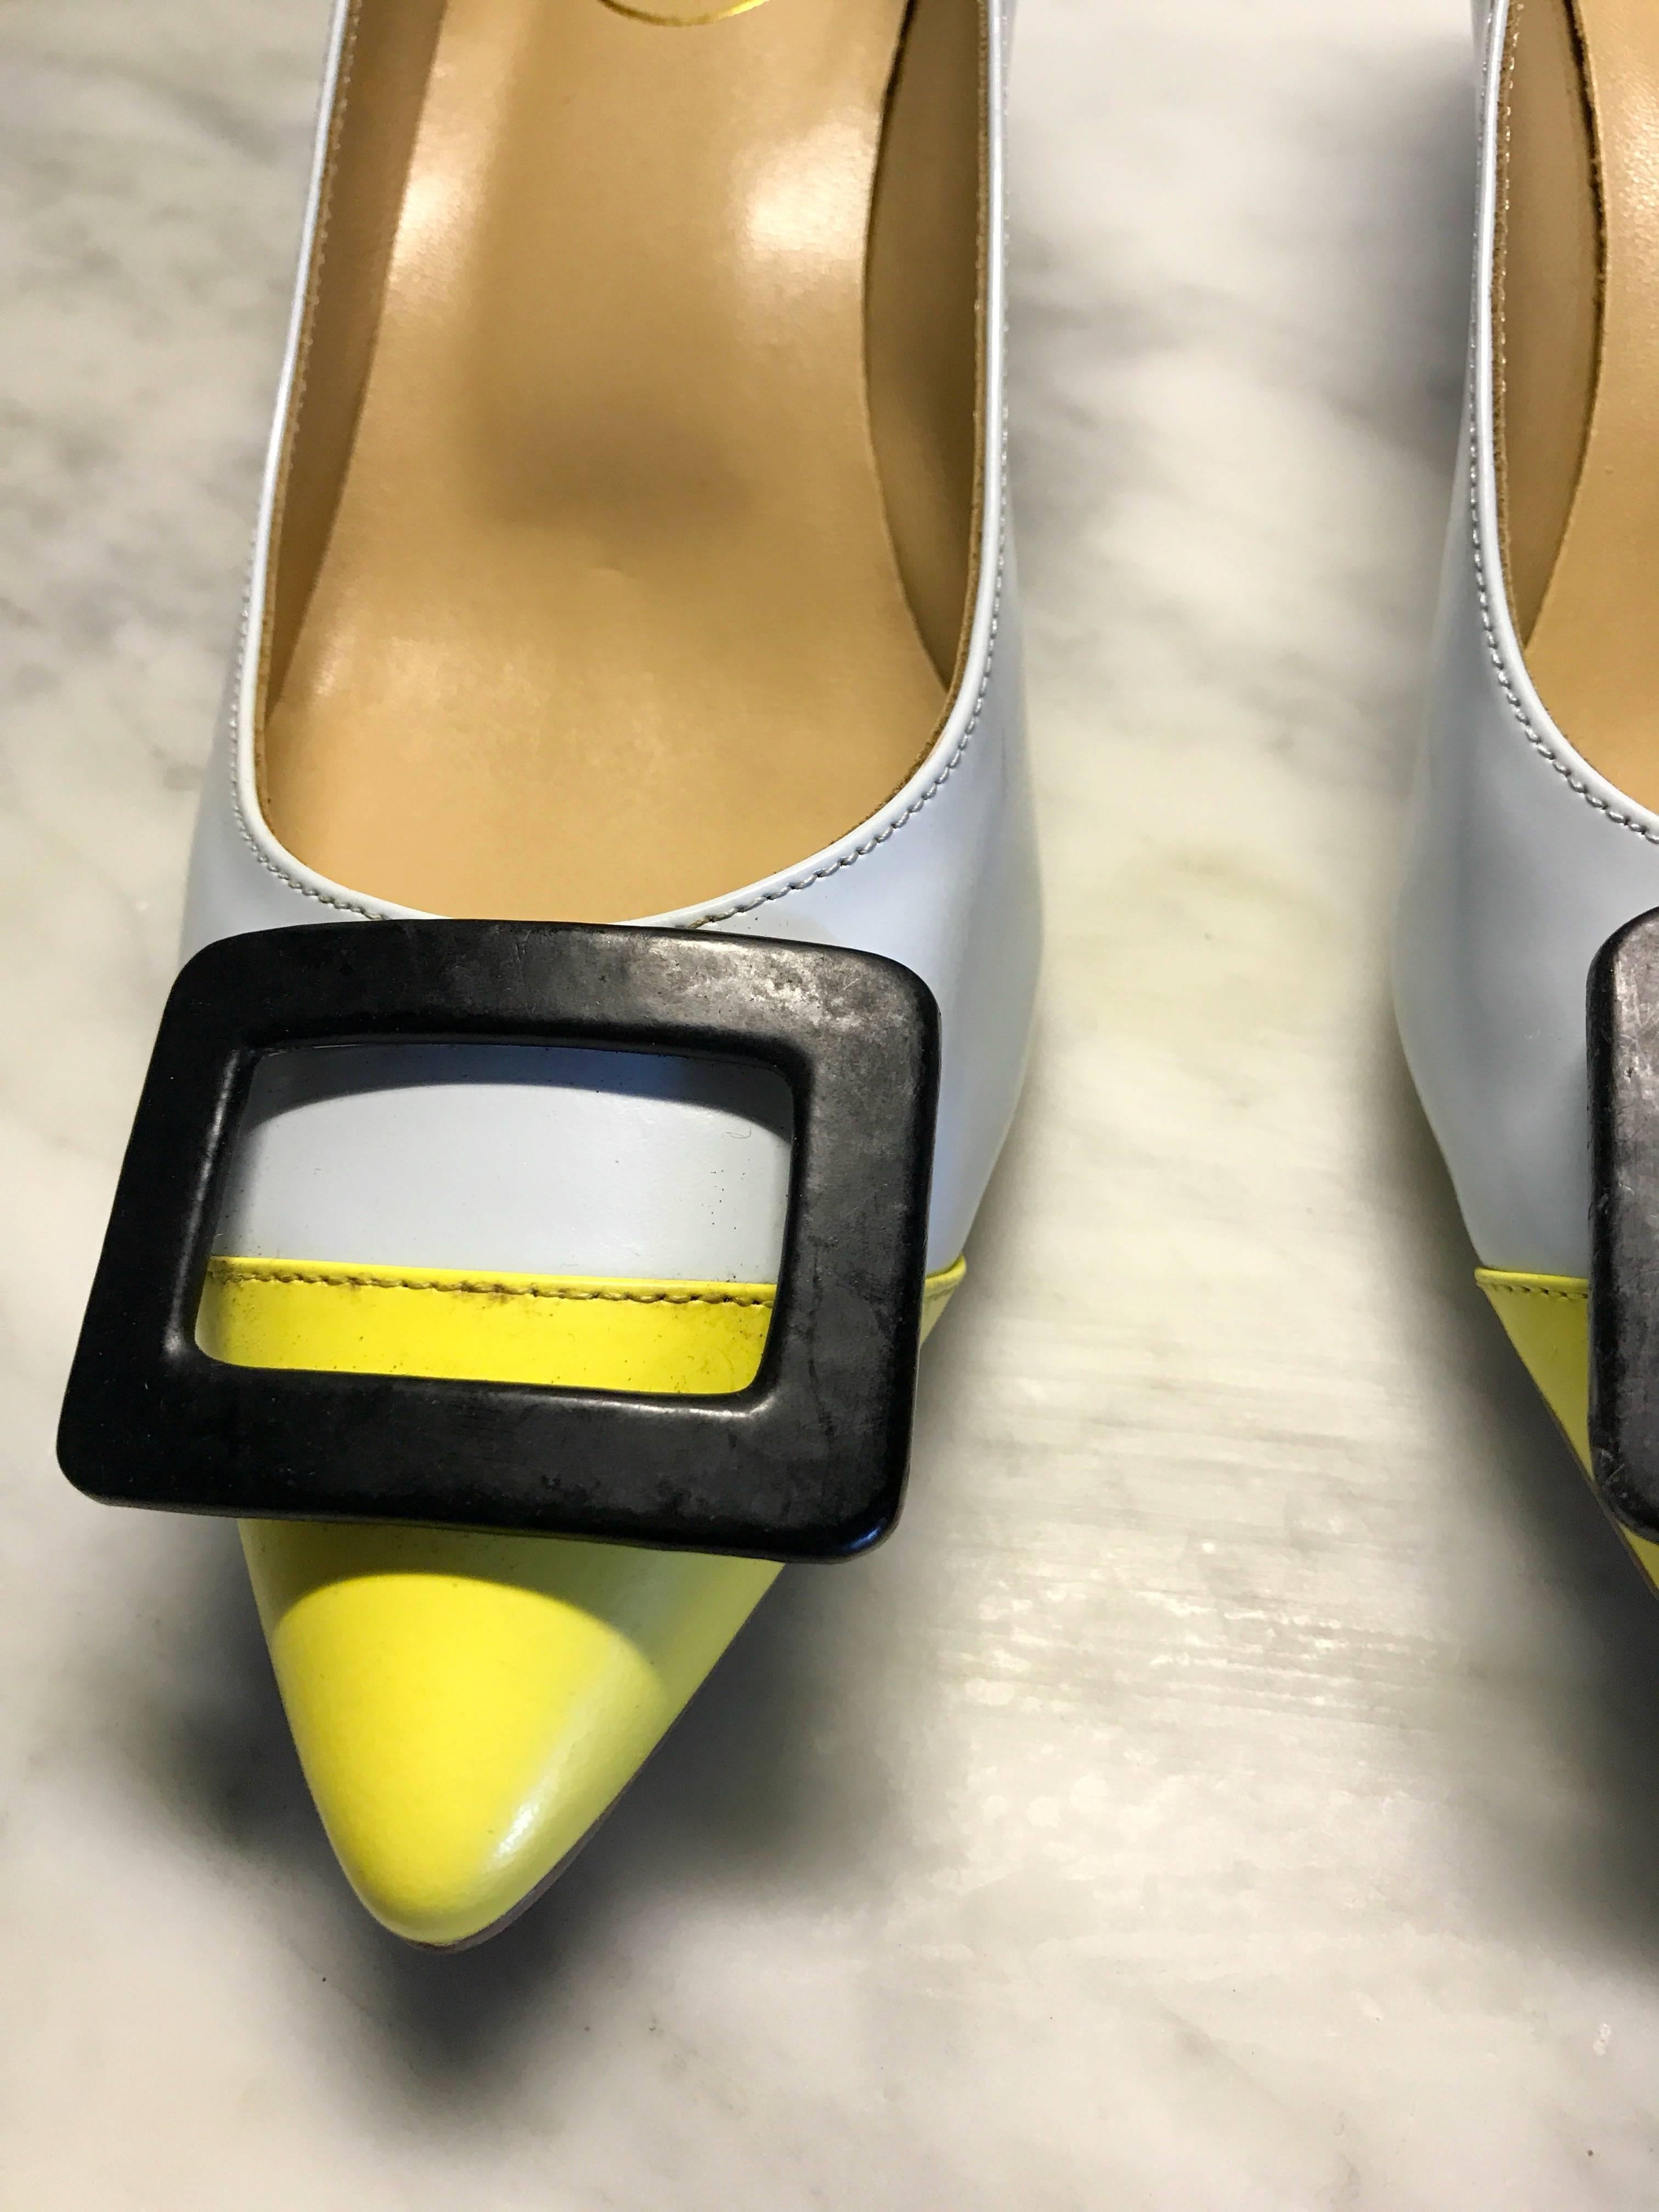 Roger Vivier Size 37 / 7 Pale Blue and Yellow Low Heel Buckle Shoes / Pumps In Excellent Condition For Sale In San Diego, CA